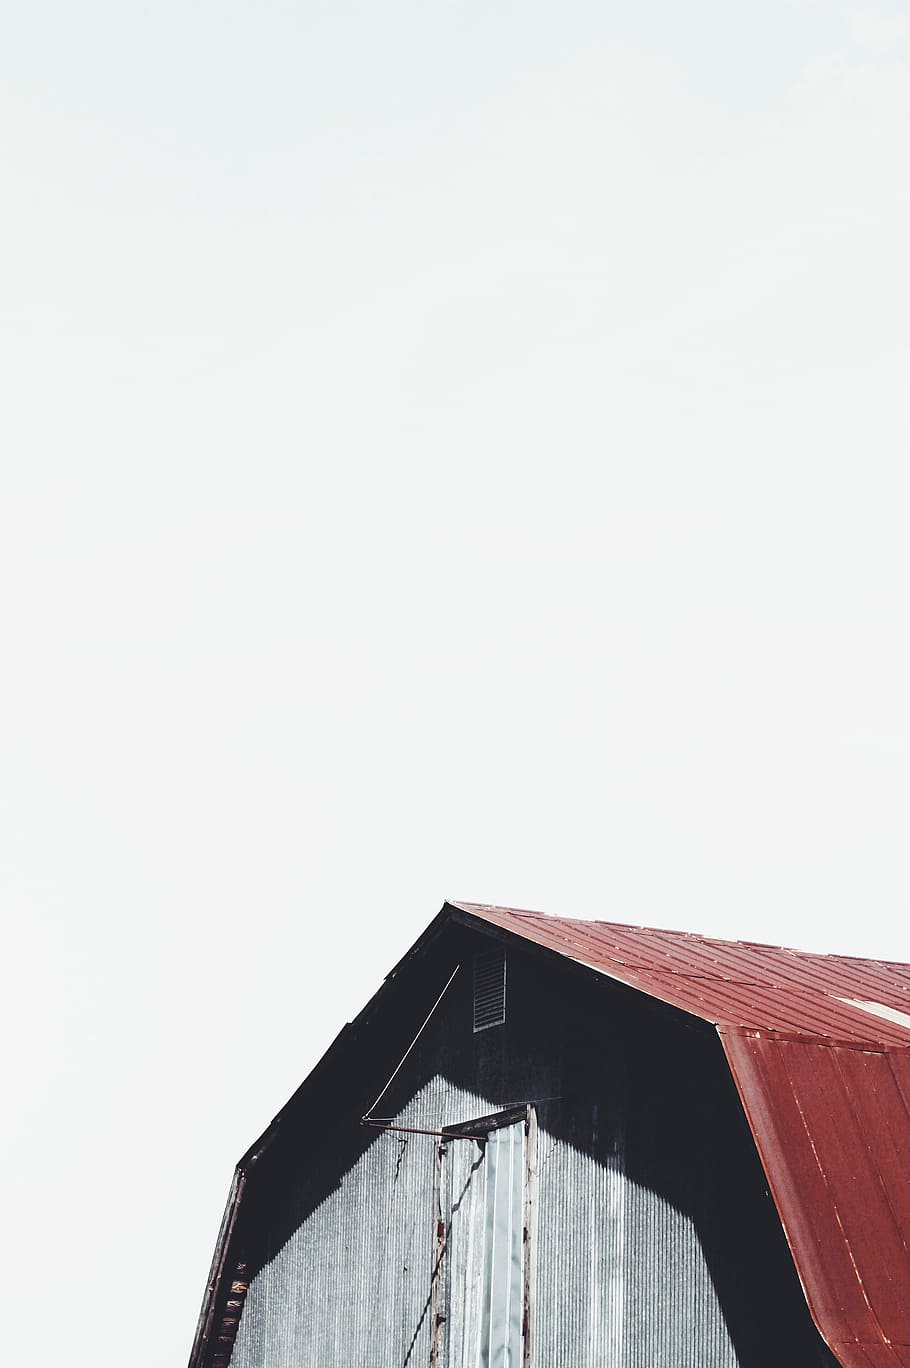 gray, red, house, red house, barns, black, farms, white, barn, wood - Material